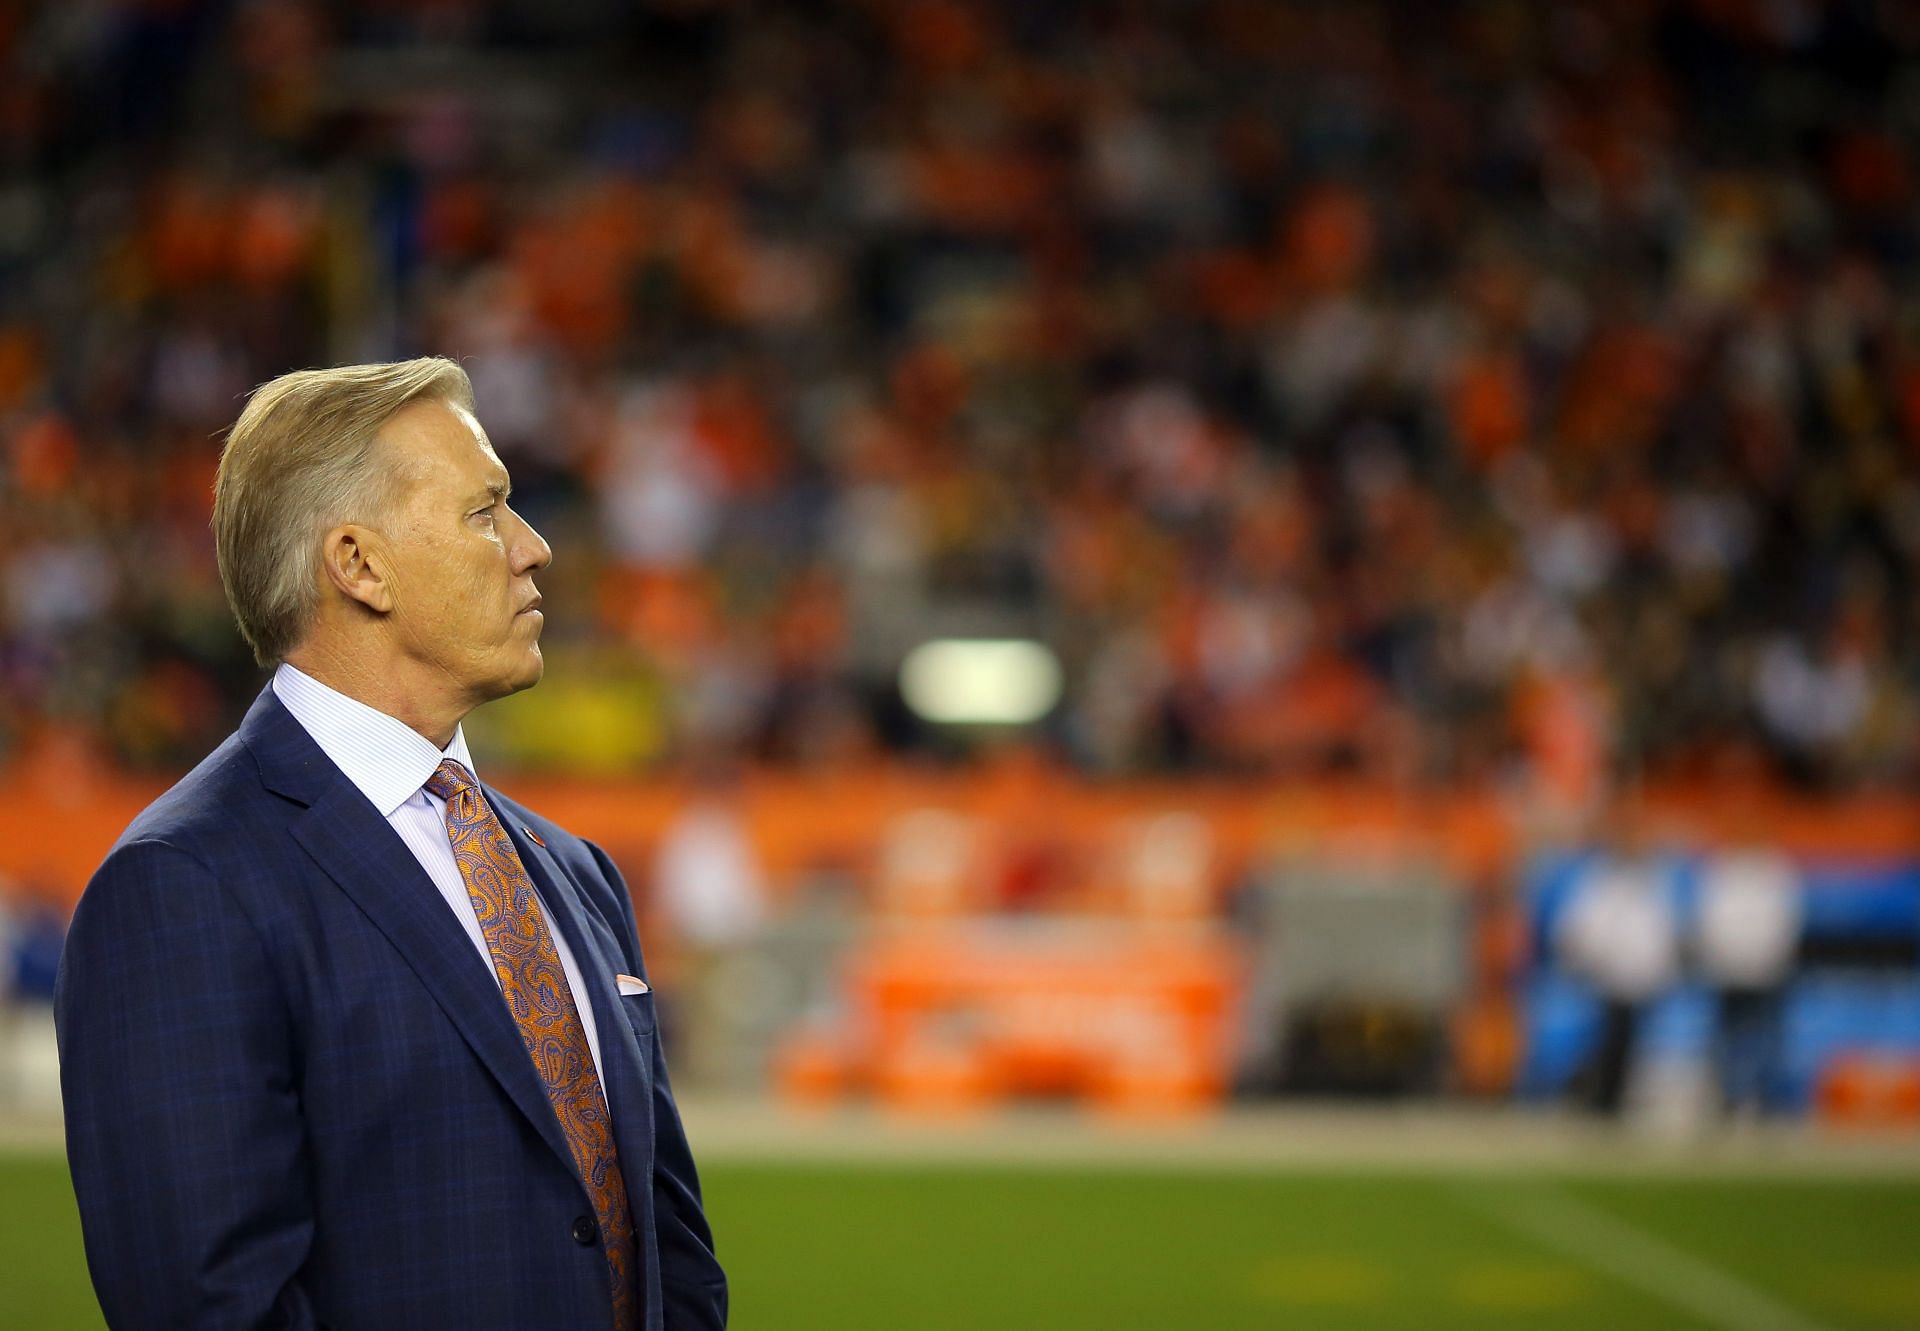 Elway worked in the front office for the Denver Broncos (2011 - 2020)